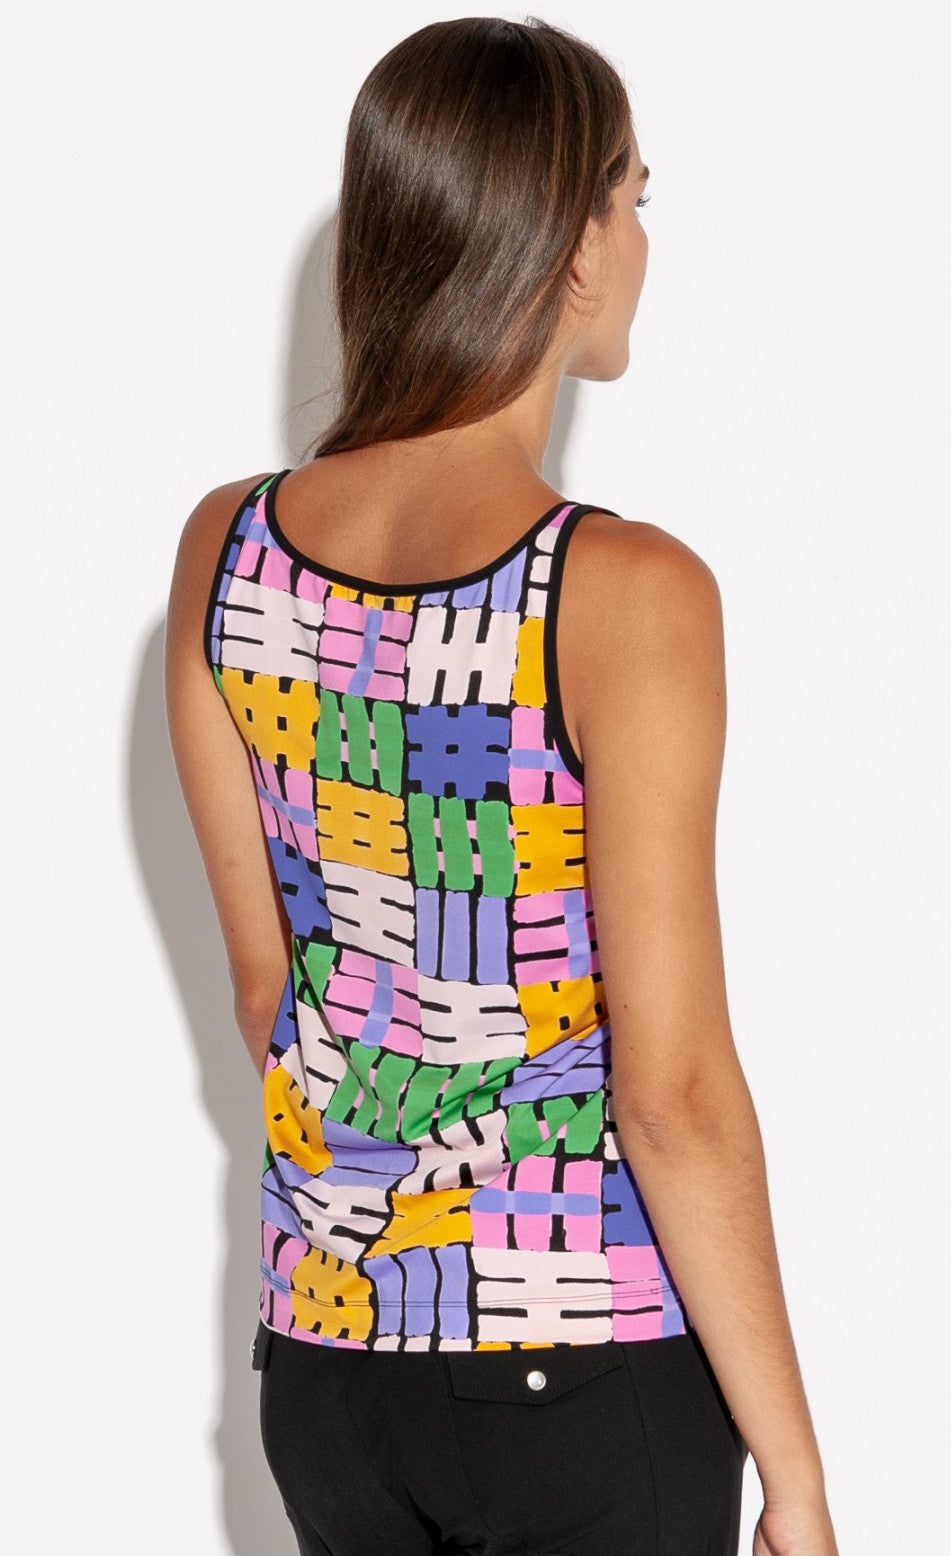 Back top half view of a woman wearing the indies belem tank top. This tank top features a hashtag print made of purple, orange, green, and pink hashtags. The tank also features black trim around the neck and straps. 